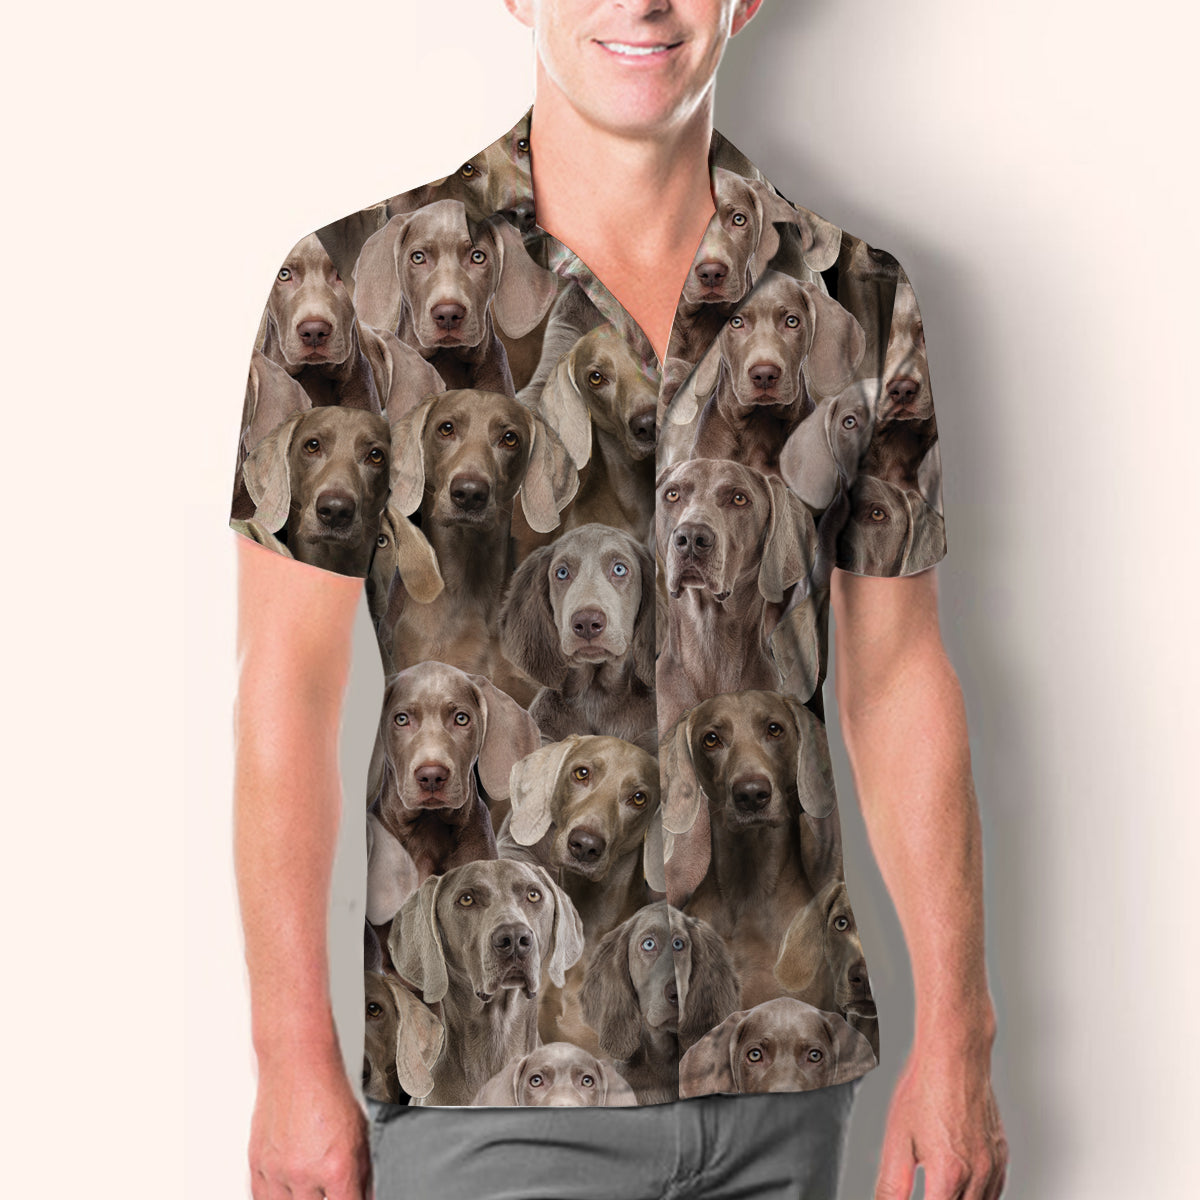 You Will Have A Bunch Of Weimaraners - Shirt V1